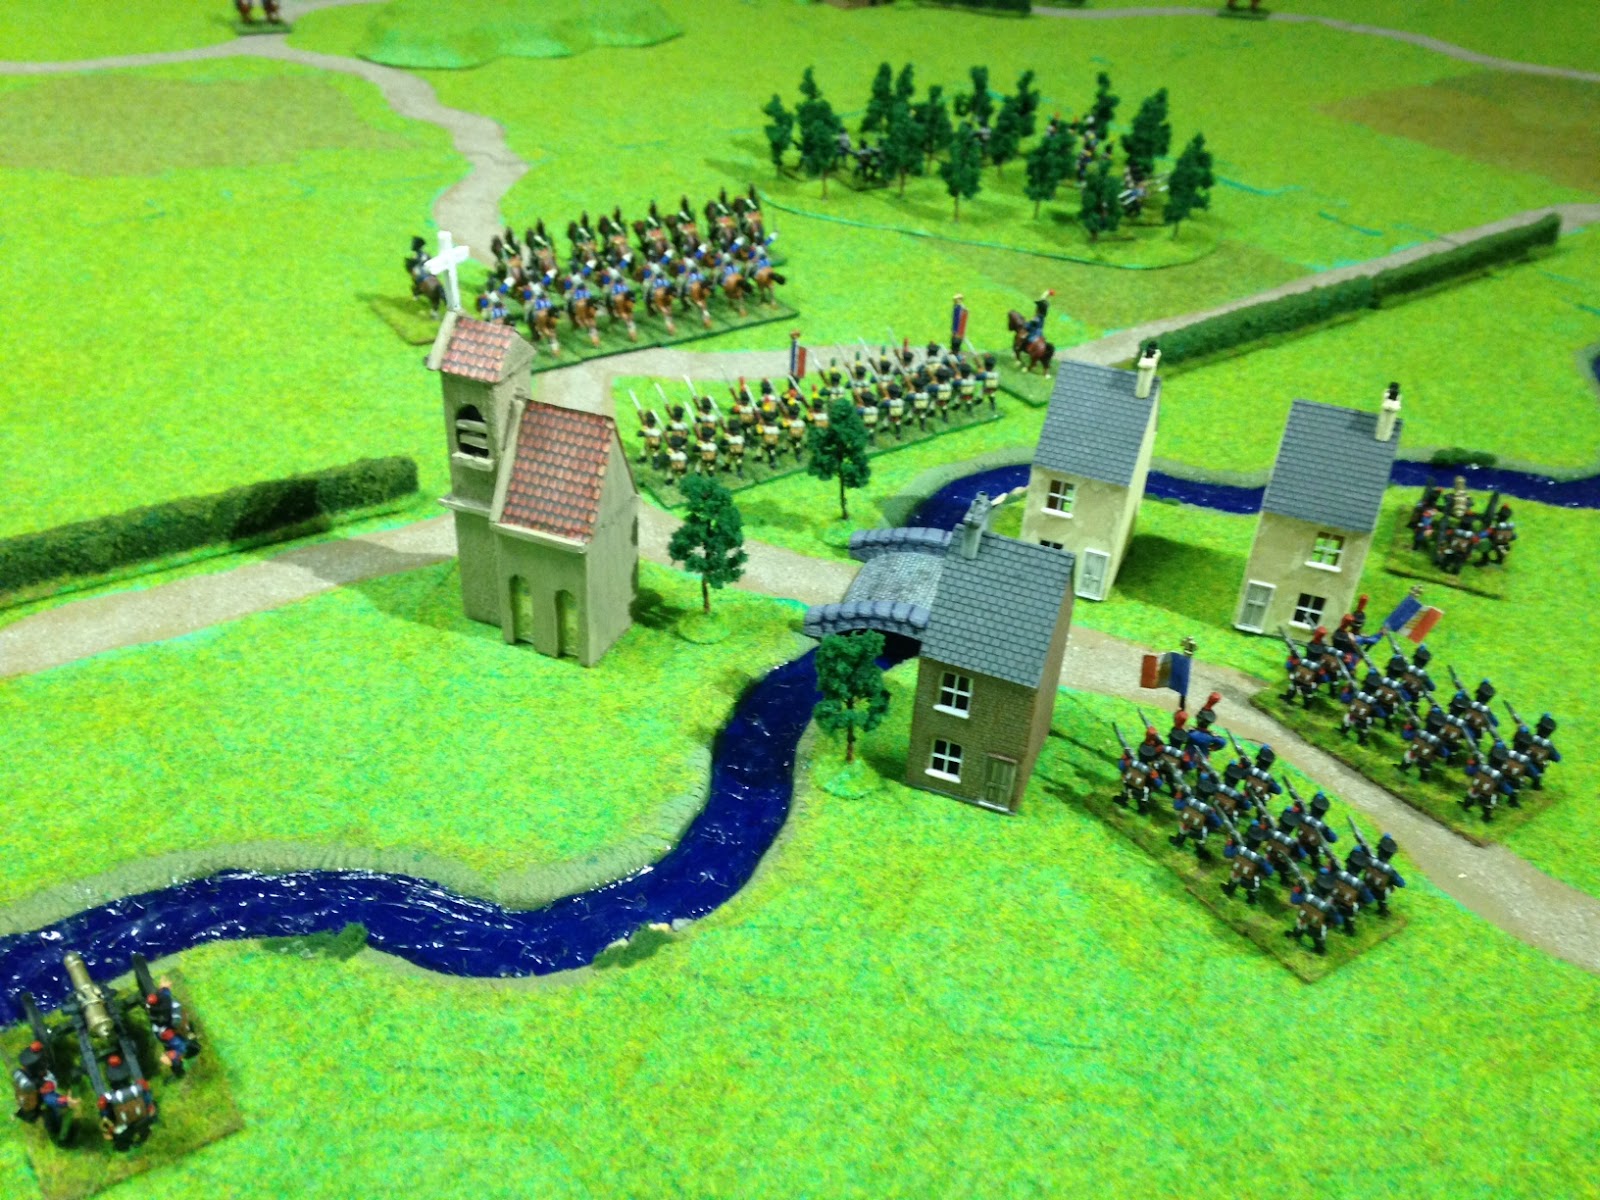 Initial French setup defending town. Light Infantry are in forest at top left, Heavy Cavalry guarding the main road, and artillery batteries each side of the town behind river. French need to hold the bridge for 15 turns to ensure it is demolished